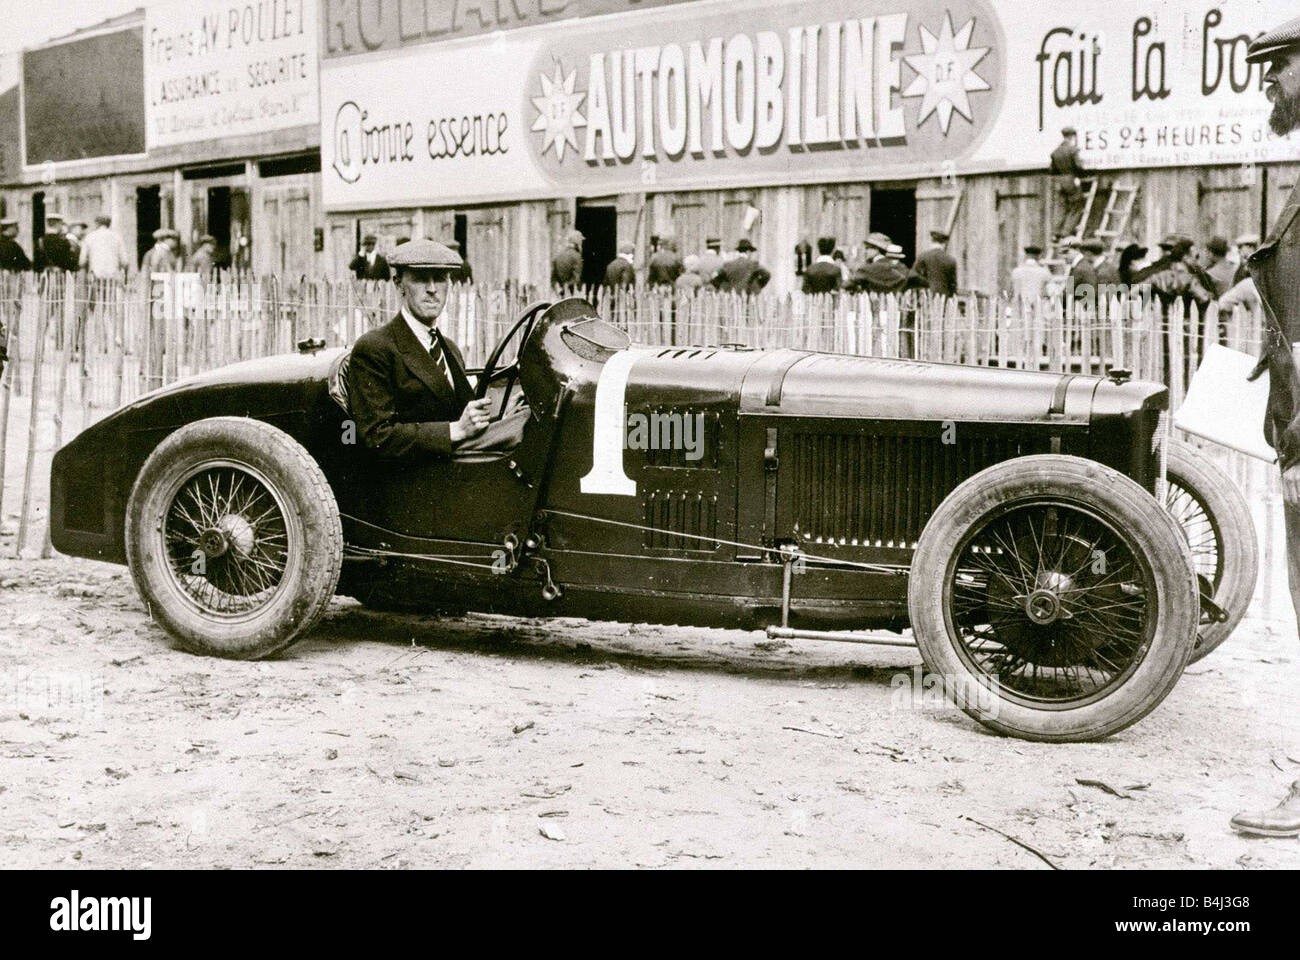 Henry Segrave with his Sunbeam motor racing car competing at the French Grand prix Monthelerey Transport Old Motor Cars Old Motor Cars vintage The Sunbeam Motor Company Number 11 Motor Sport Old Motor Racing 1920 s September 1925 Mirrorpix Mirrorpix Stock Photo